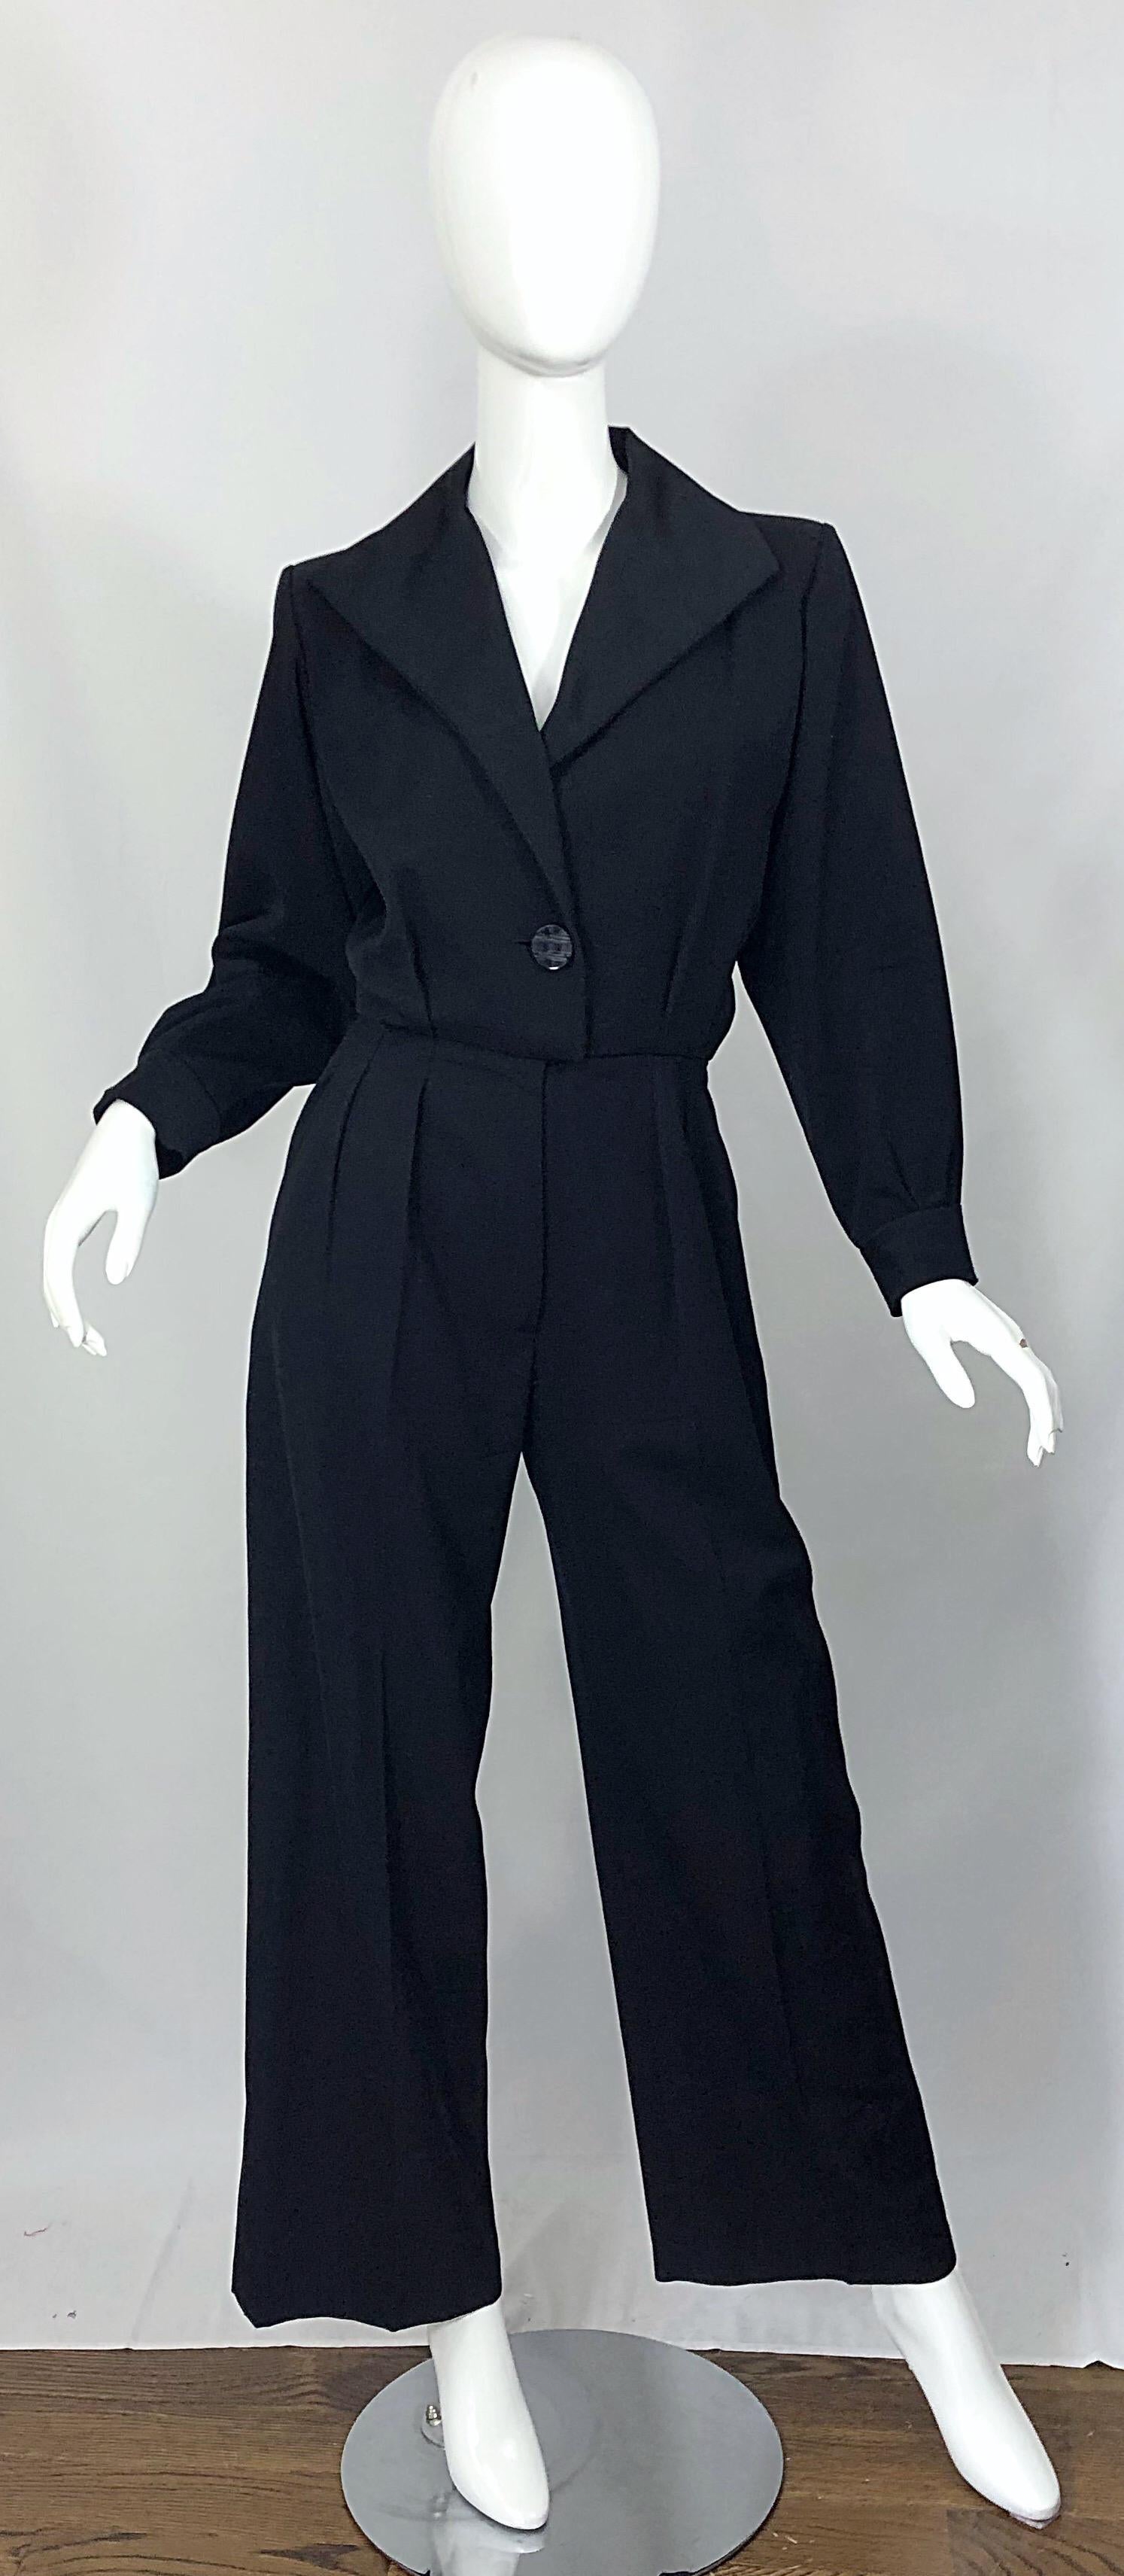 Effortlessly chic, timeless and classic vintage YVES SAINT LAURENT YSL Rive Gauche black long sleeve le smoking tuxedo jumpsuit! Signature YSL exaggerated lapels. Single button closure with hidden zipper fly and multiple hook-and-eye closures.